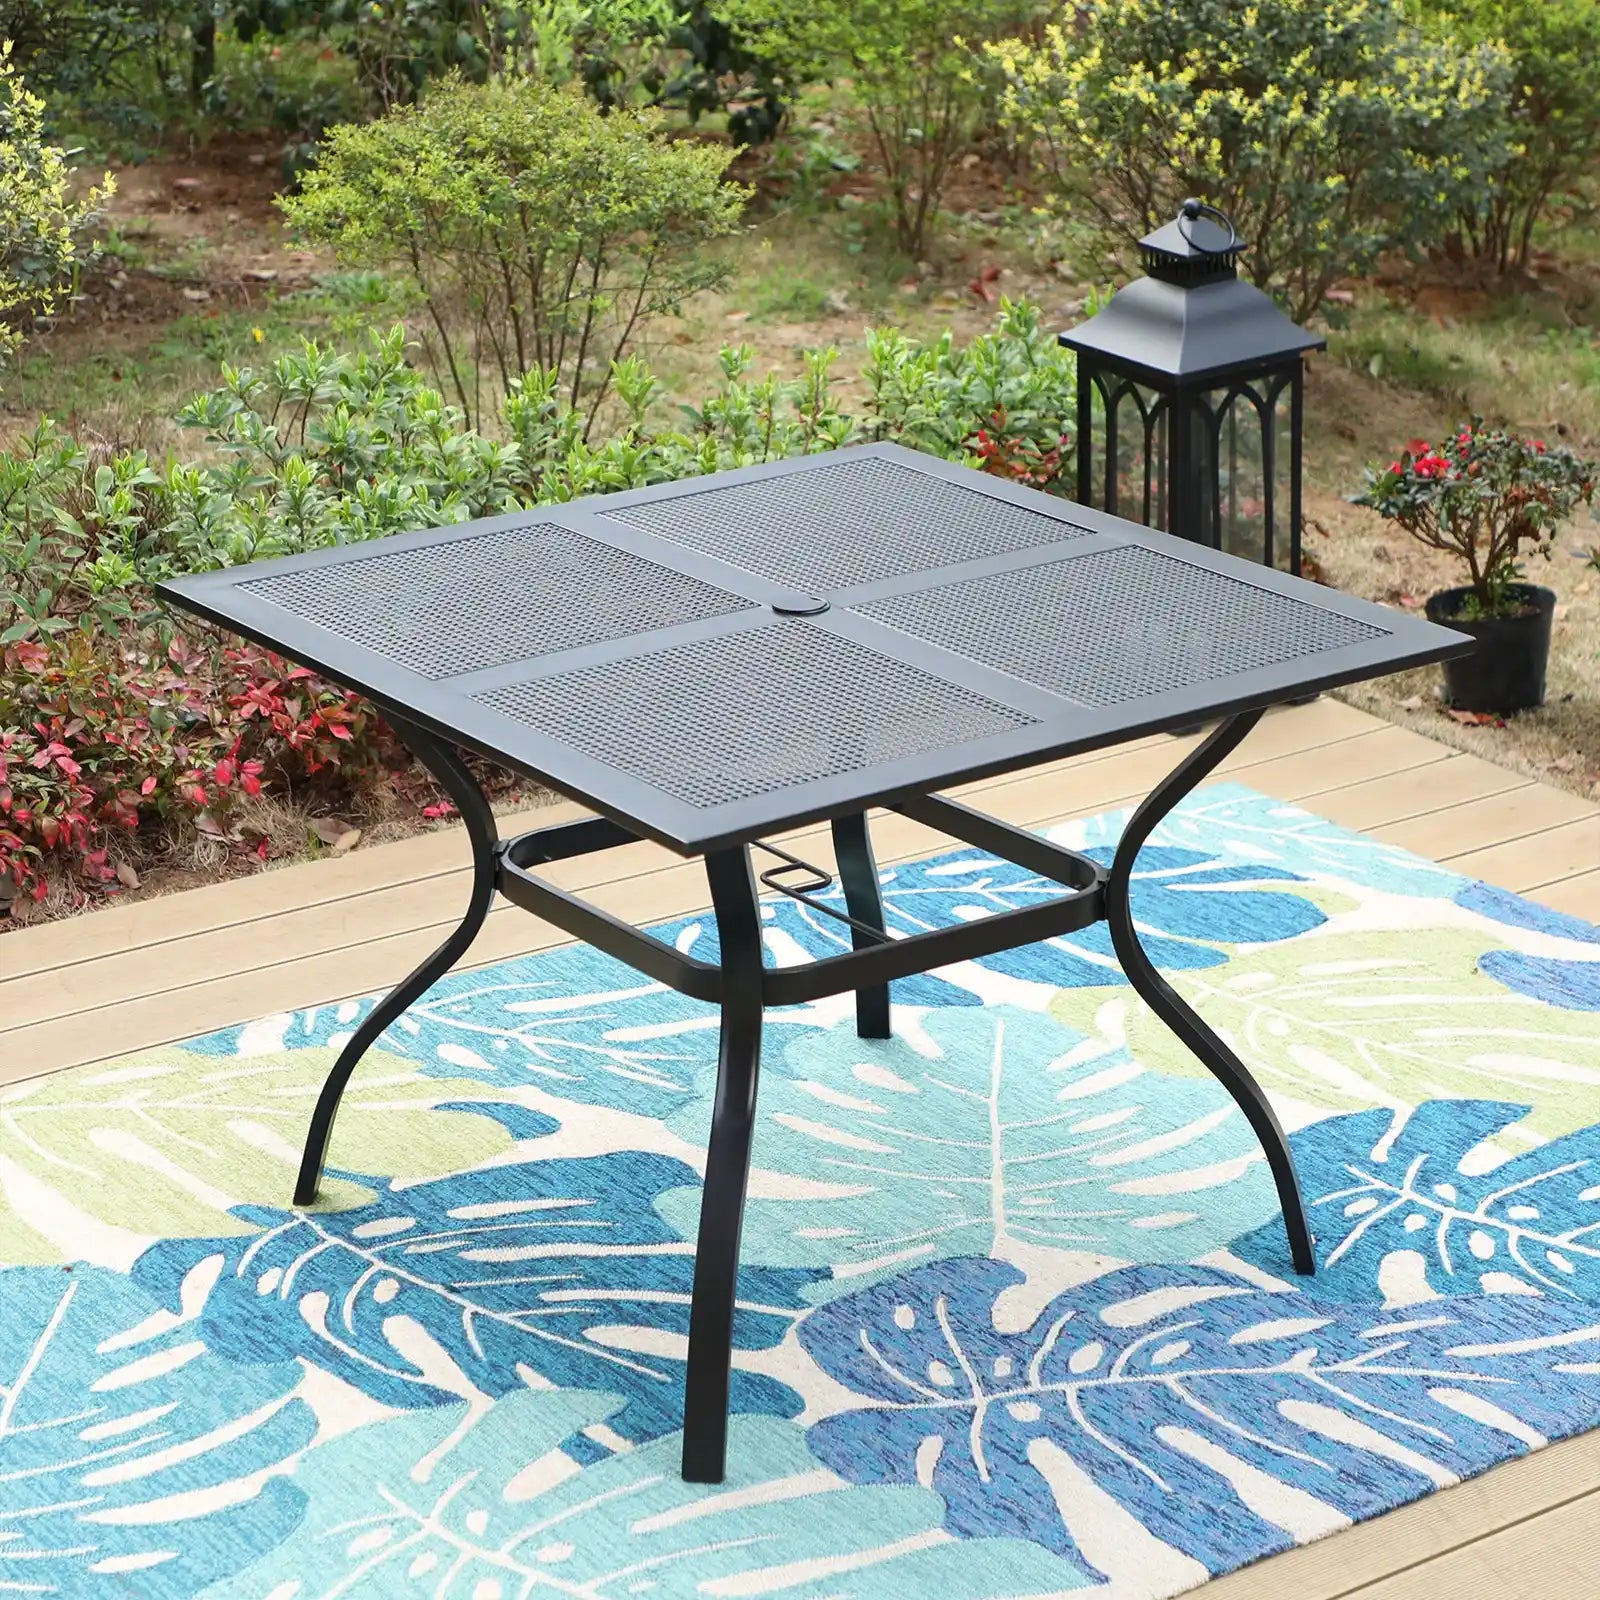 Square Outdoor Metal Dining Table with Umbrella Hole, Black